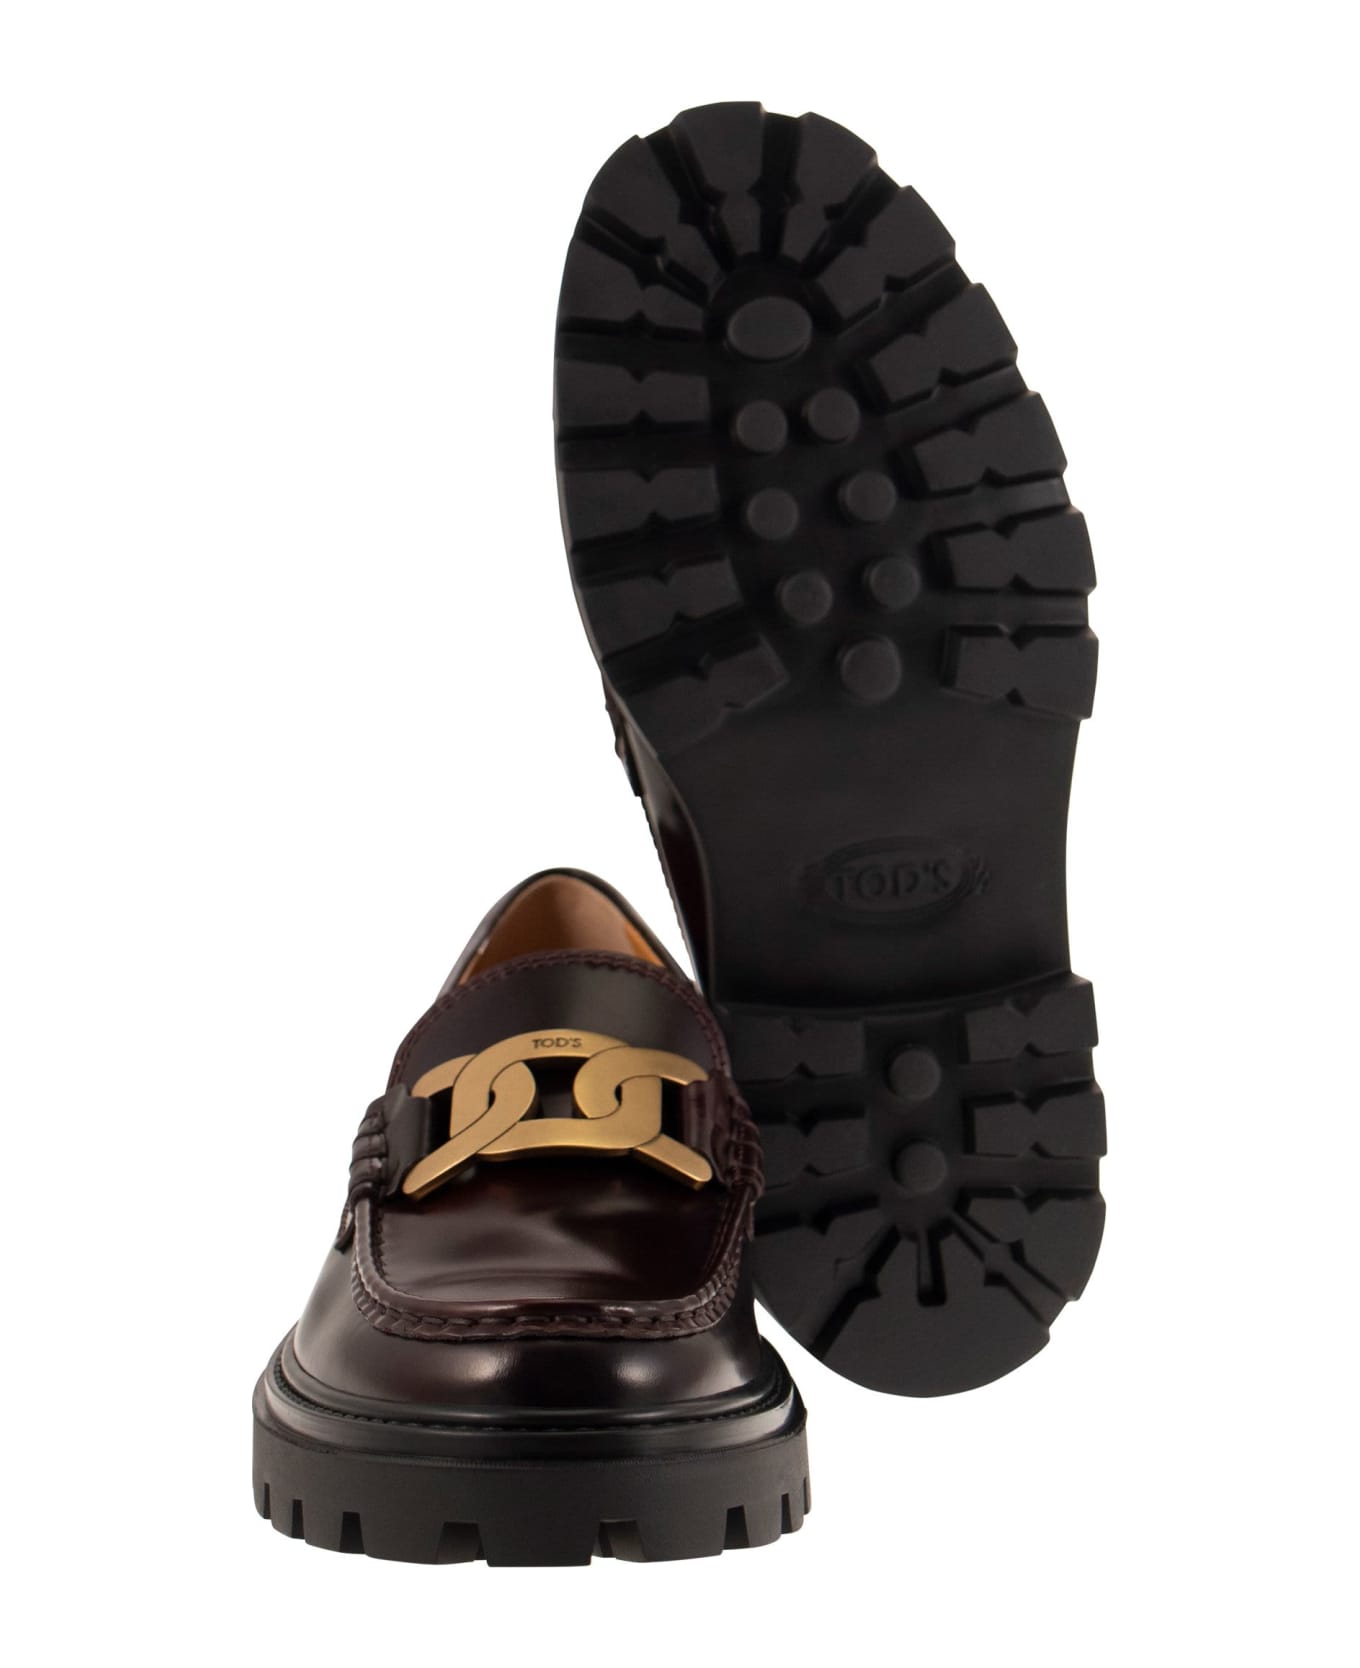 Tod's Moccasin With Chain - Bordeaux